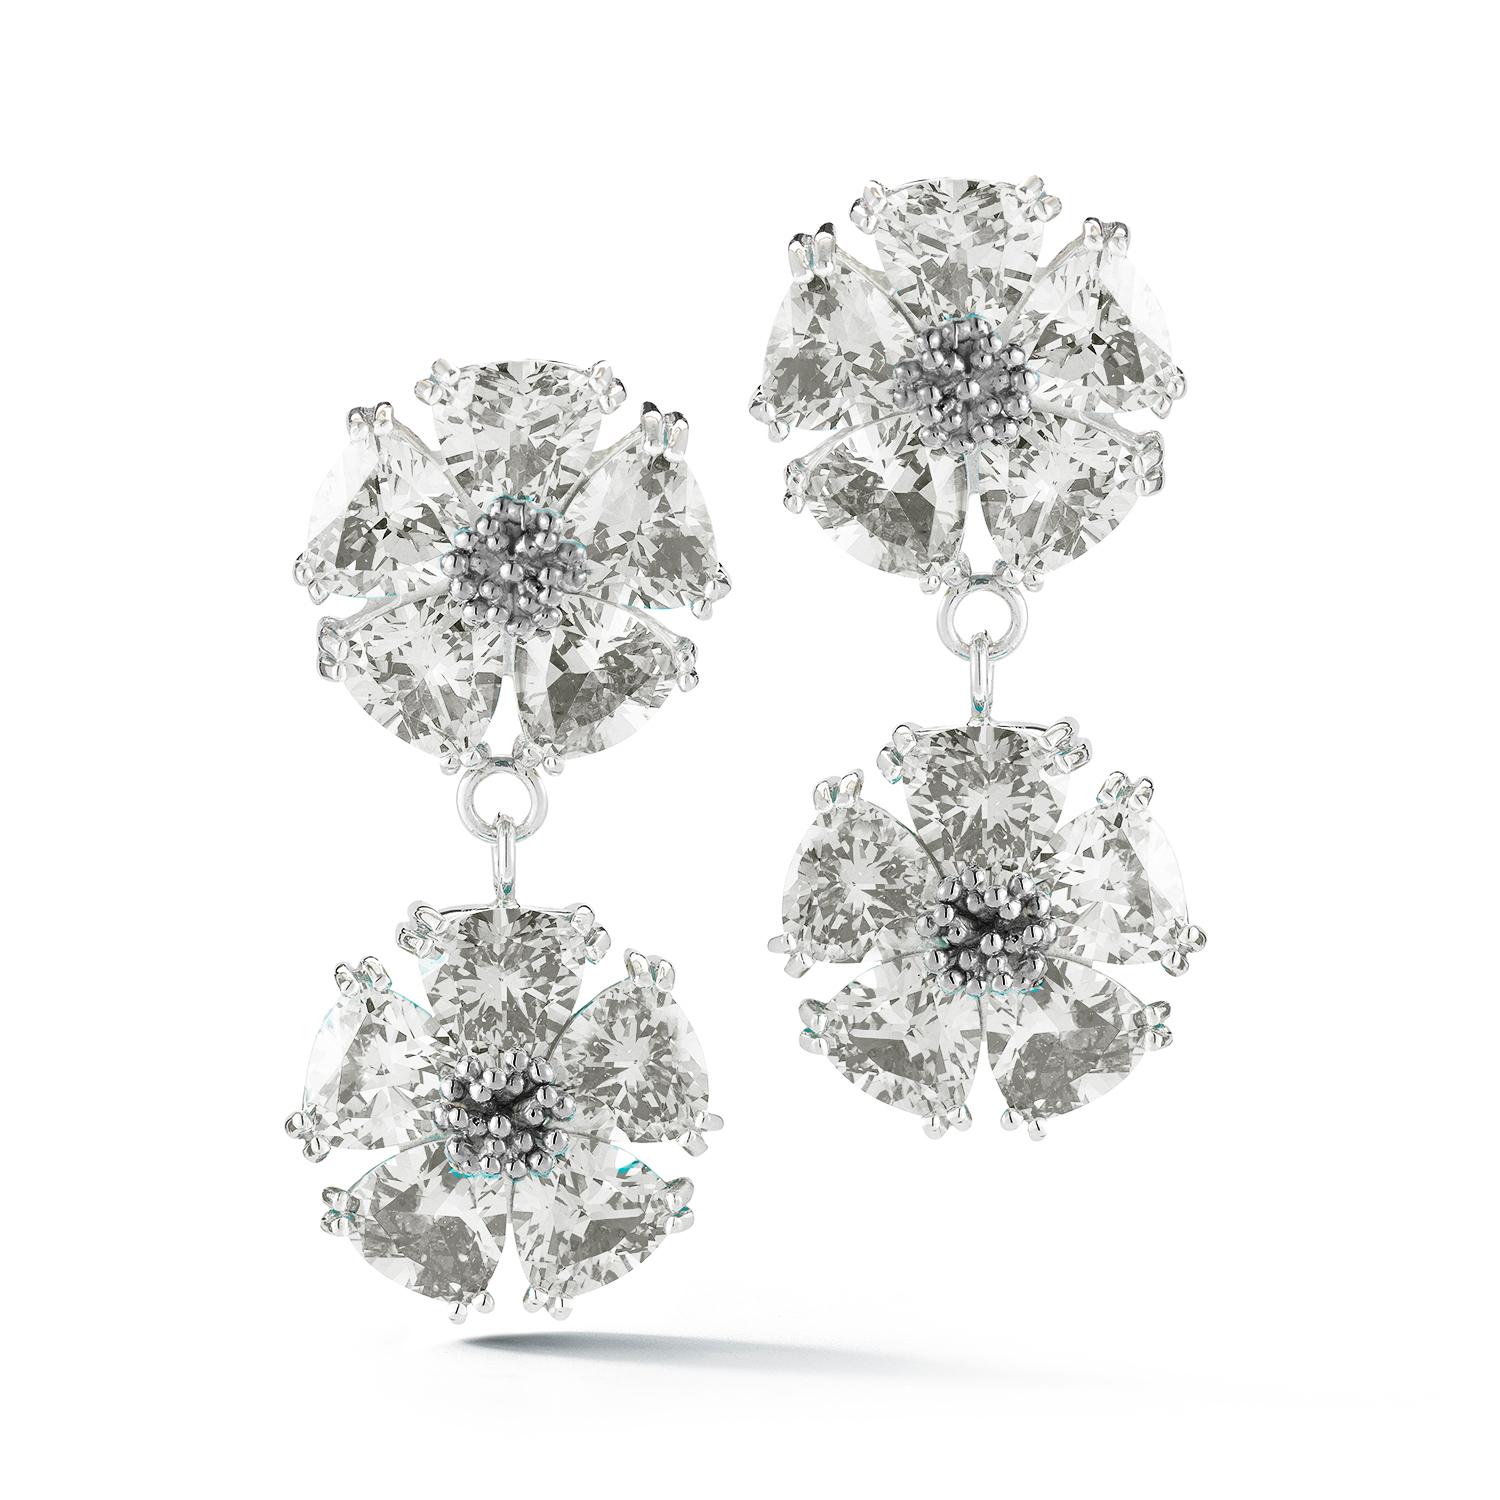 Designed in NYC

.925 Sterling Silver 2 x 20 mm White Topaz Double Blossom Stone Earrings. Double the beauty with double blossom with stone 3D earrings for show-stopping day or night looks. Available in a variety of different gemstone colors (white,